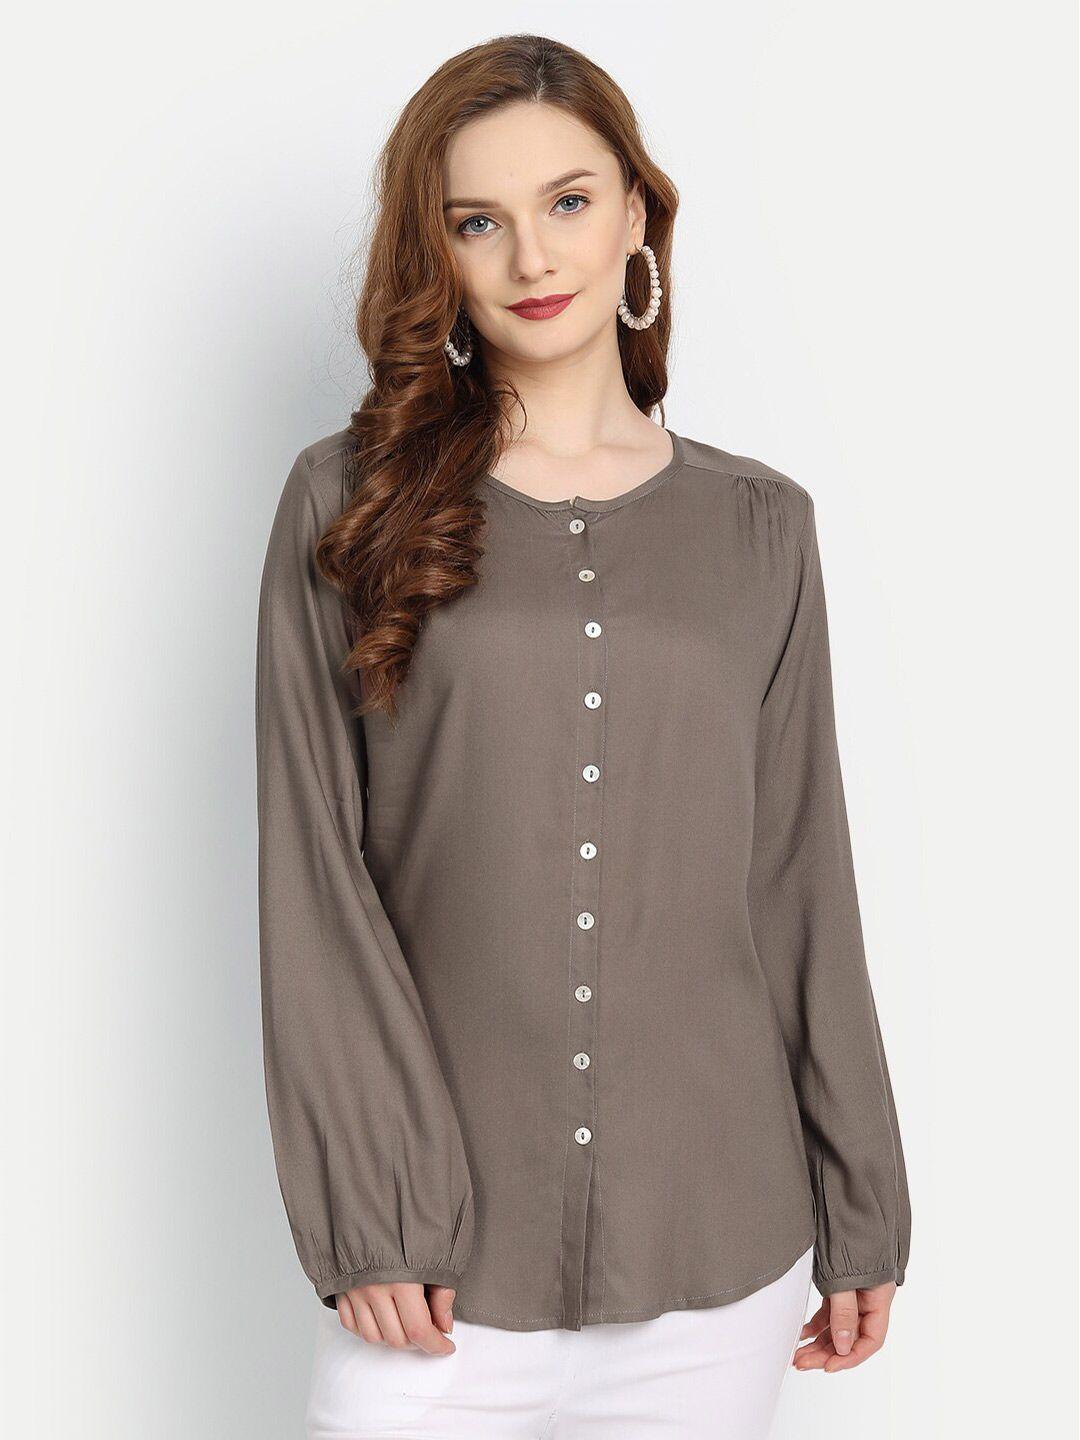 fabglobal women brown shirt style pure cotton top